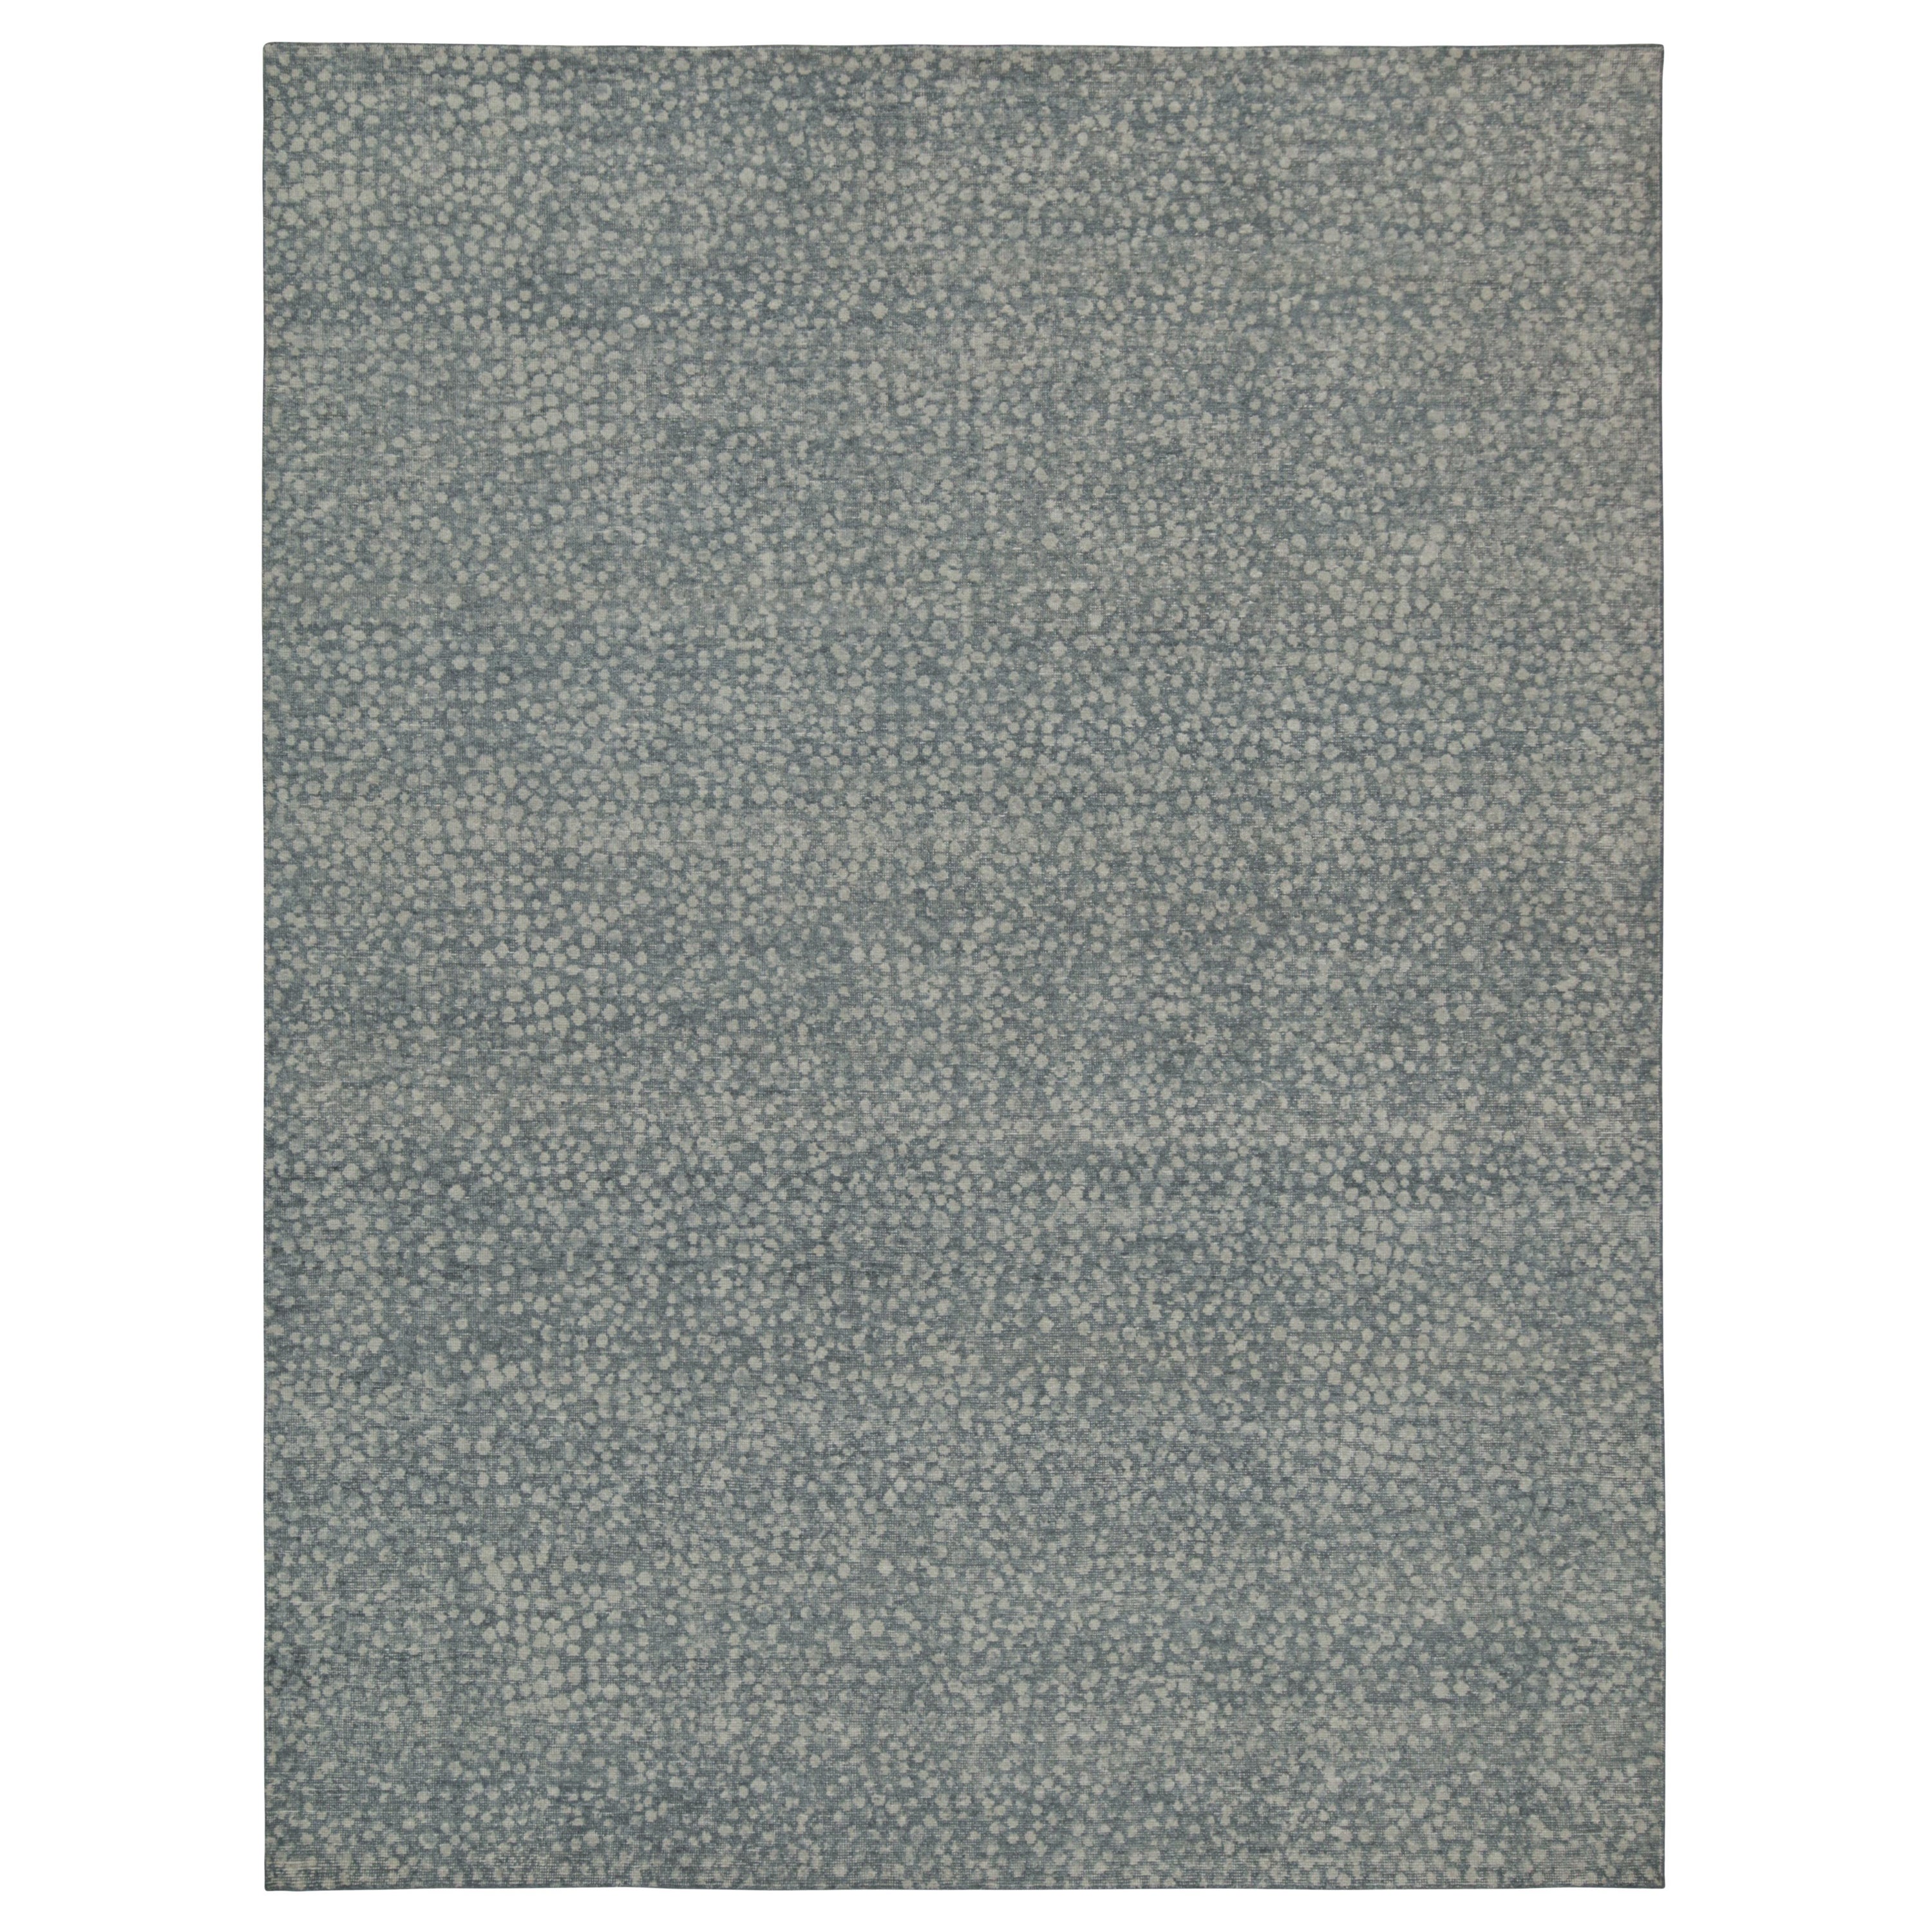 Rug & Kilim’s Distressed Style Abstract Rug in Blue with Gray Dots Pattern For Sale